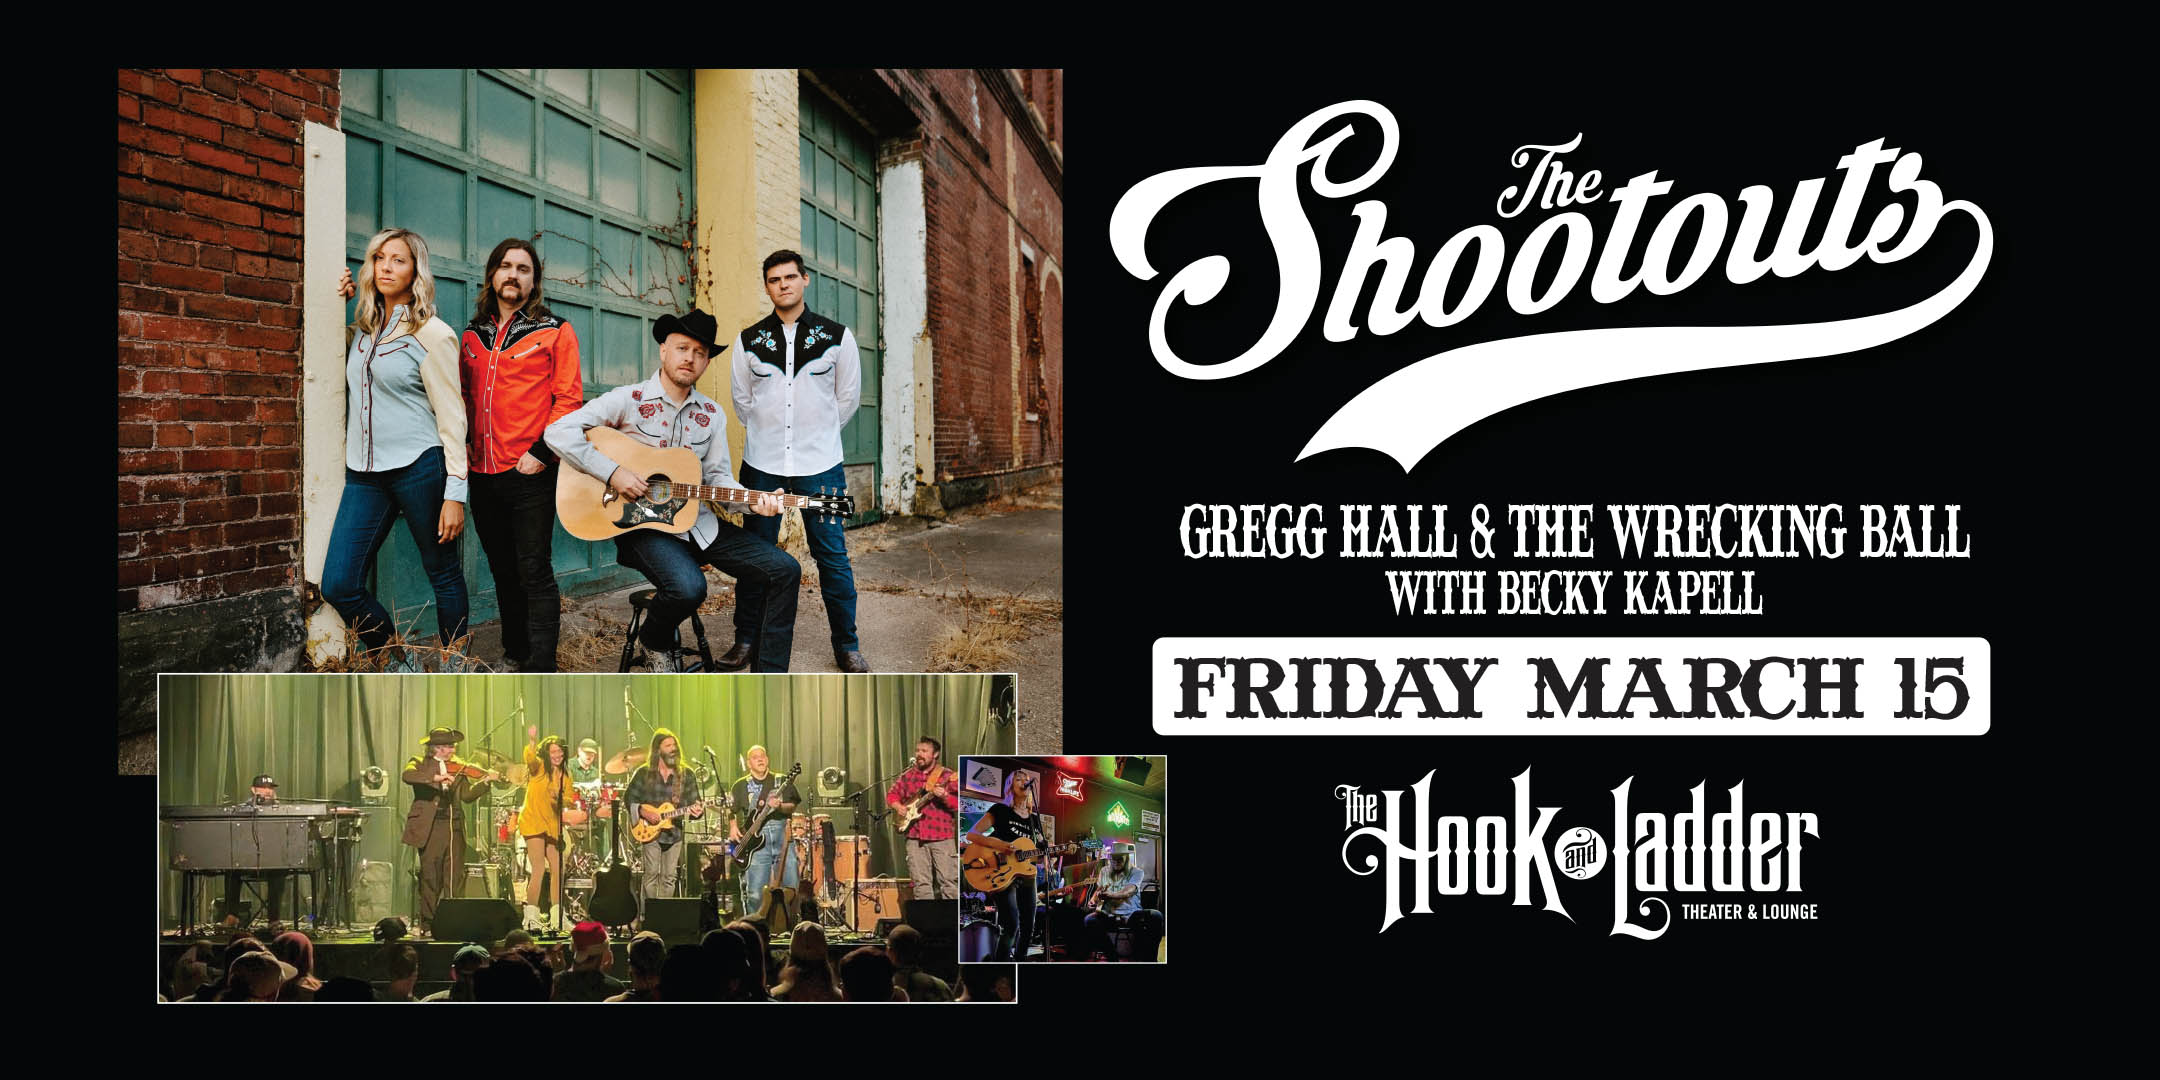 Nobool Presents The Shootouts / Gregg Hall & The Wrecking Ball with guest Becky Kapell Friday, March 15 The Hook and Ladder Theater Doors 7:30pm :: Music 8:00pm :: 21+ $12 ADV / $16 DOS